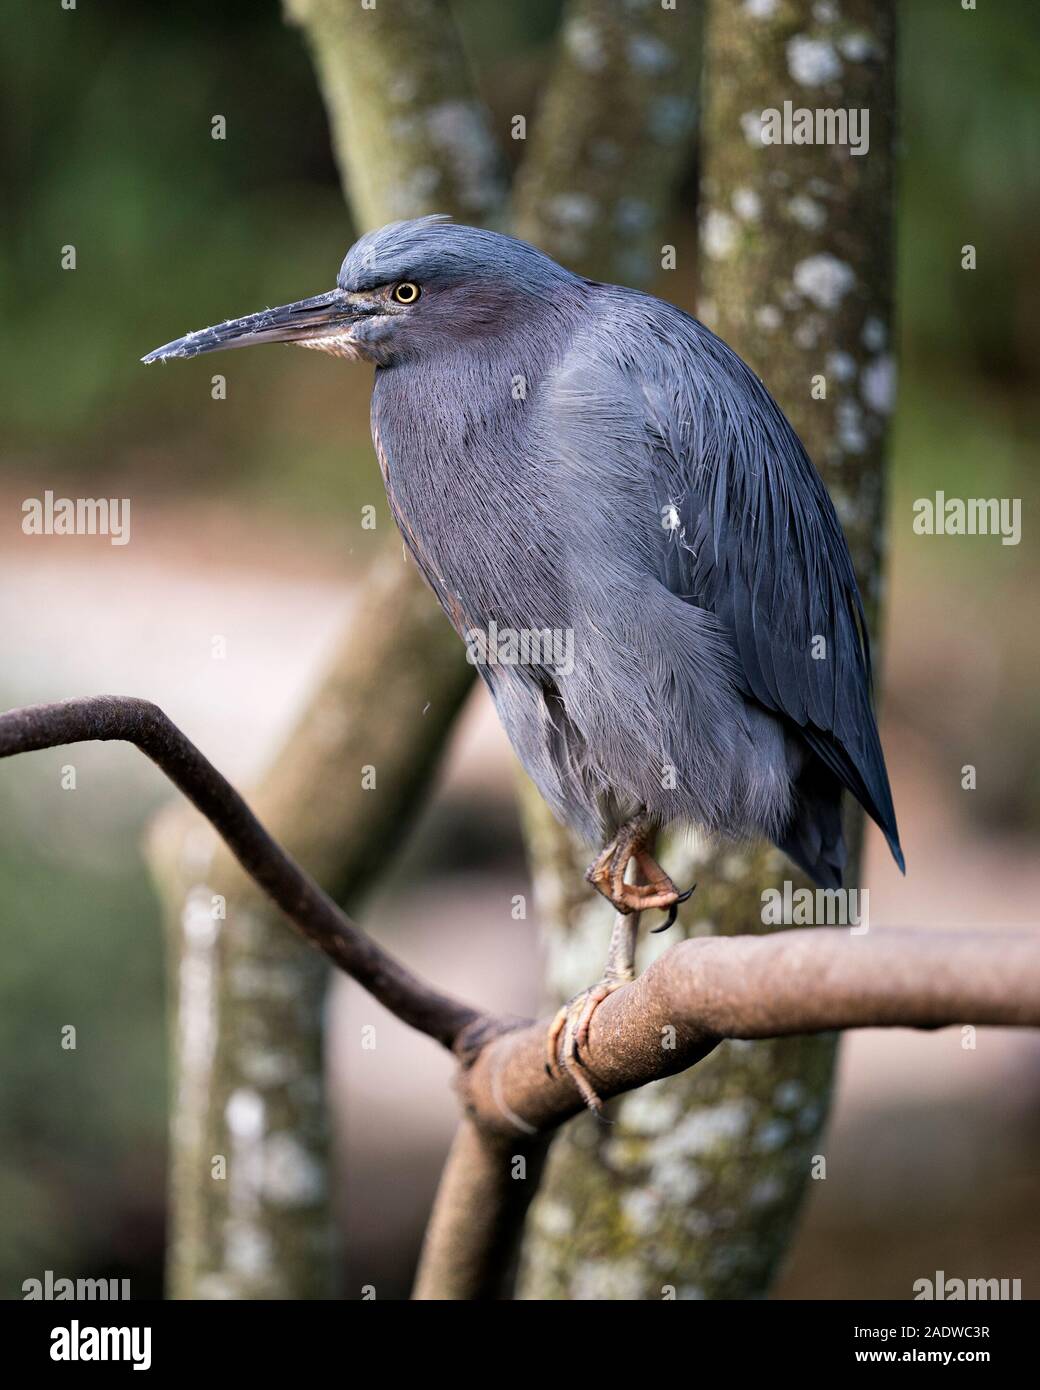 Little Blue bird close-up profile view with a bokeh background perched on a branch displaying its body, head, eye, beak, feet its surrounding Stock Photo